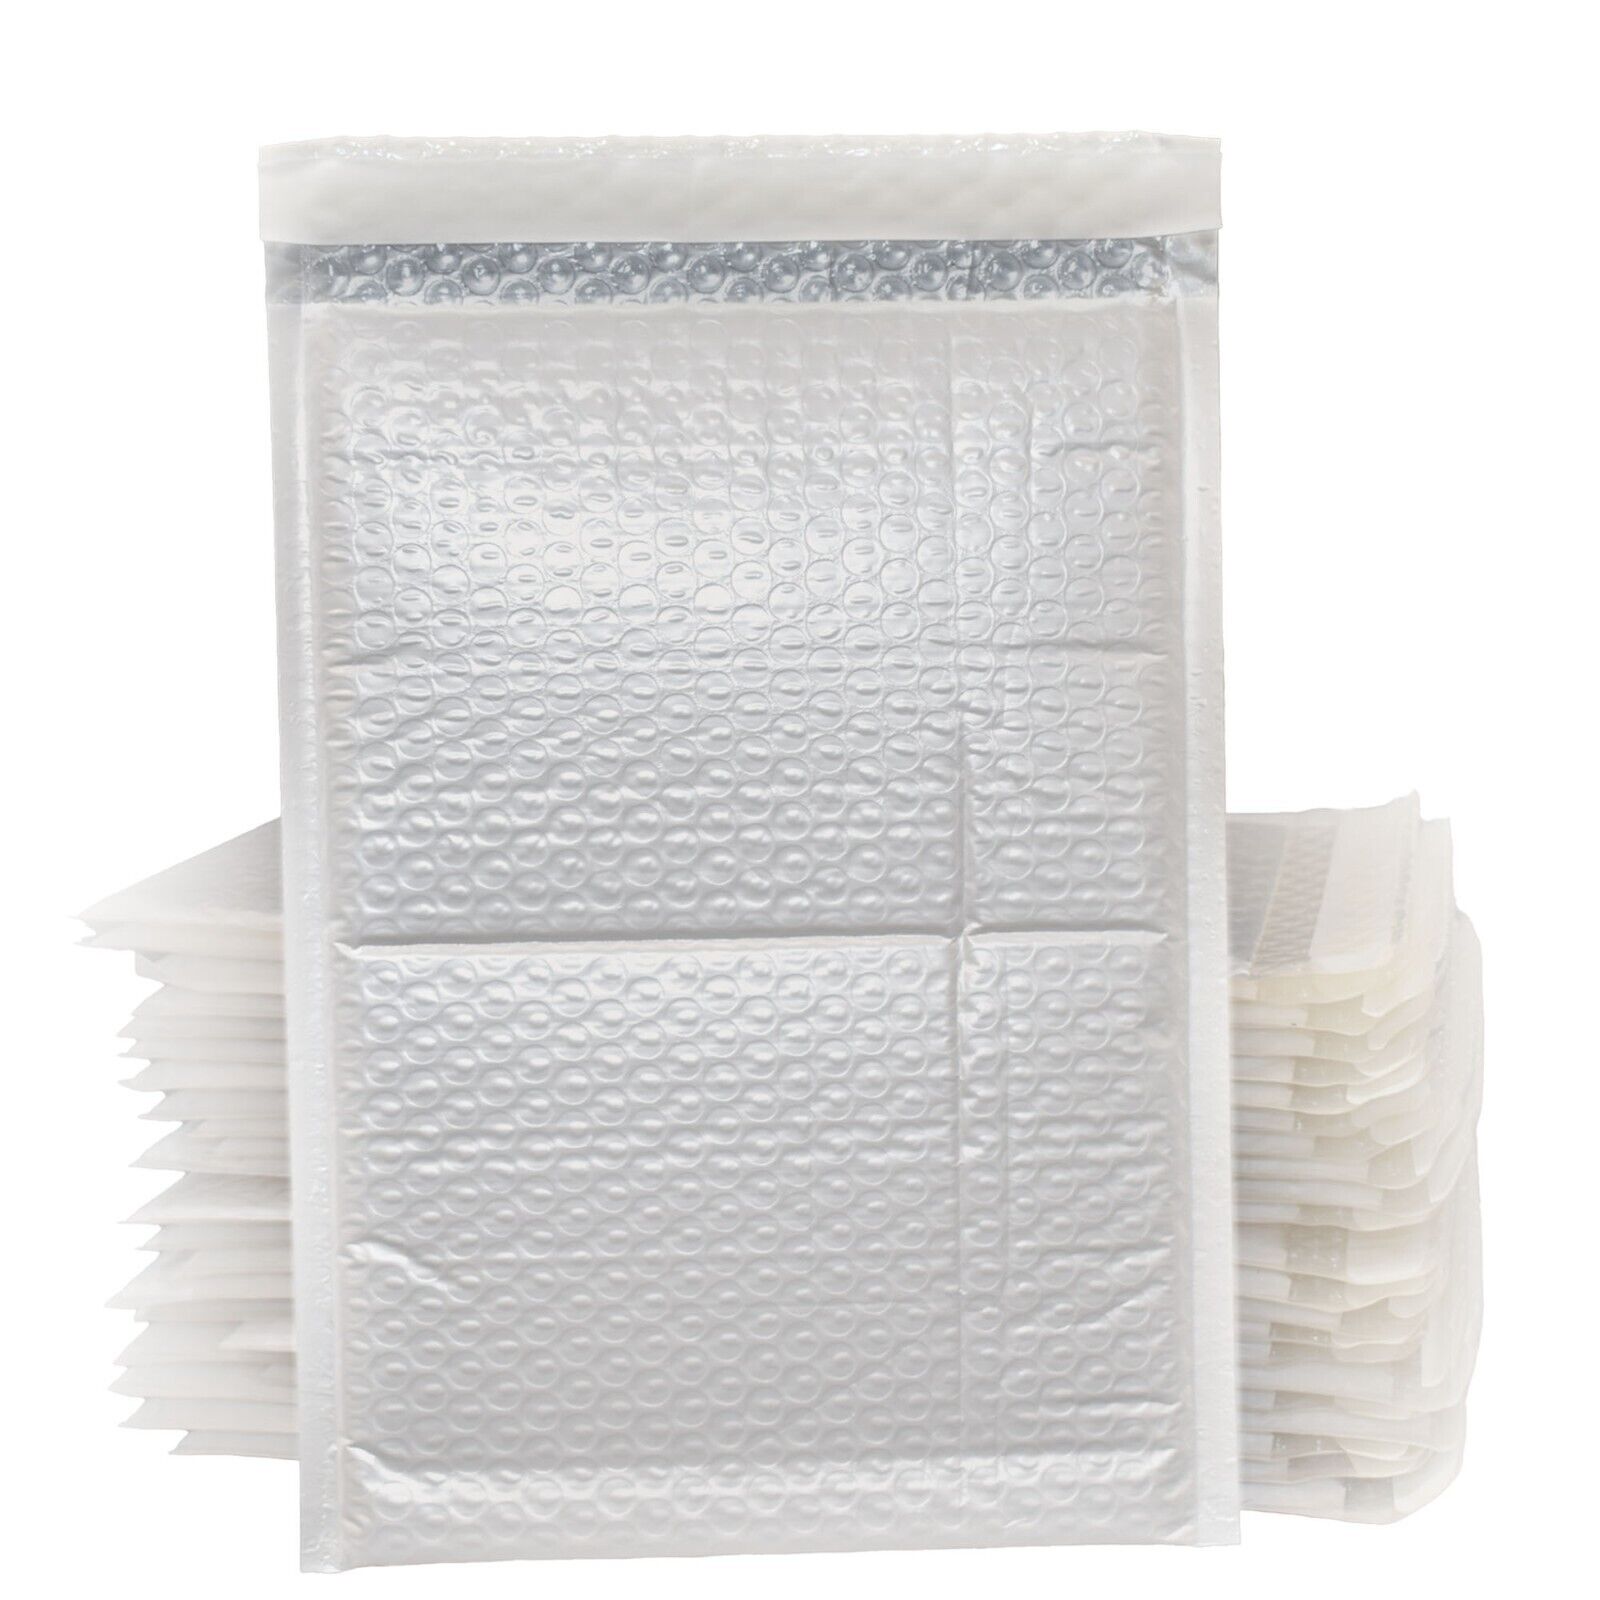 Poly Bubble Mailer 9”x12” Bubble Padded Envelopes Mailers Mailing Bag